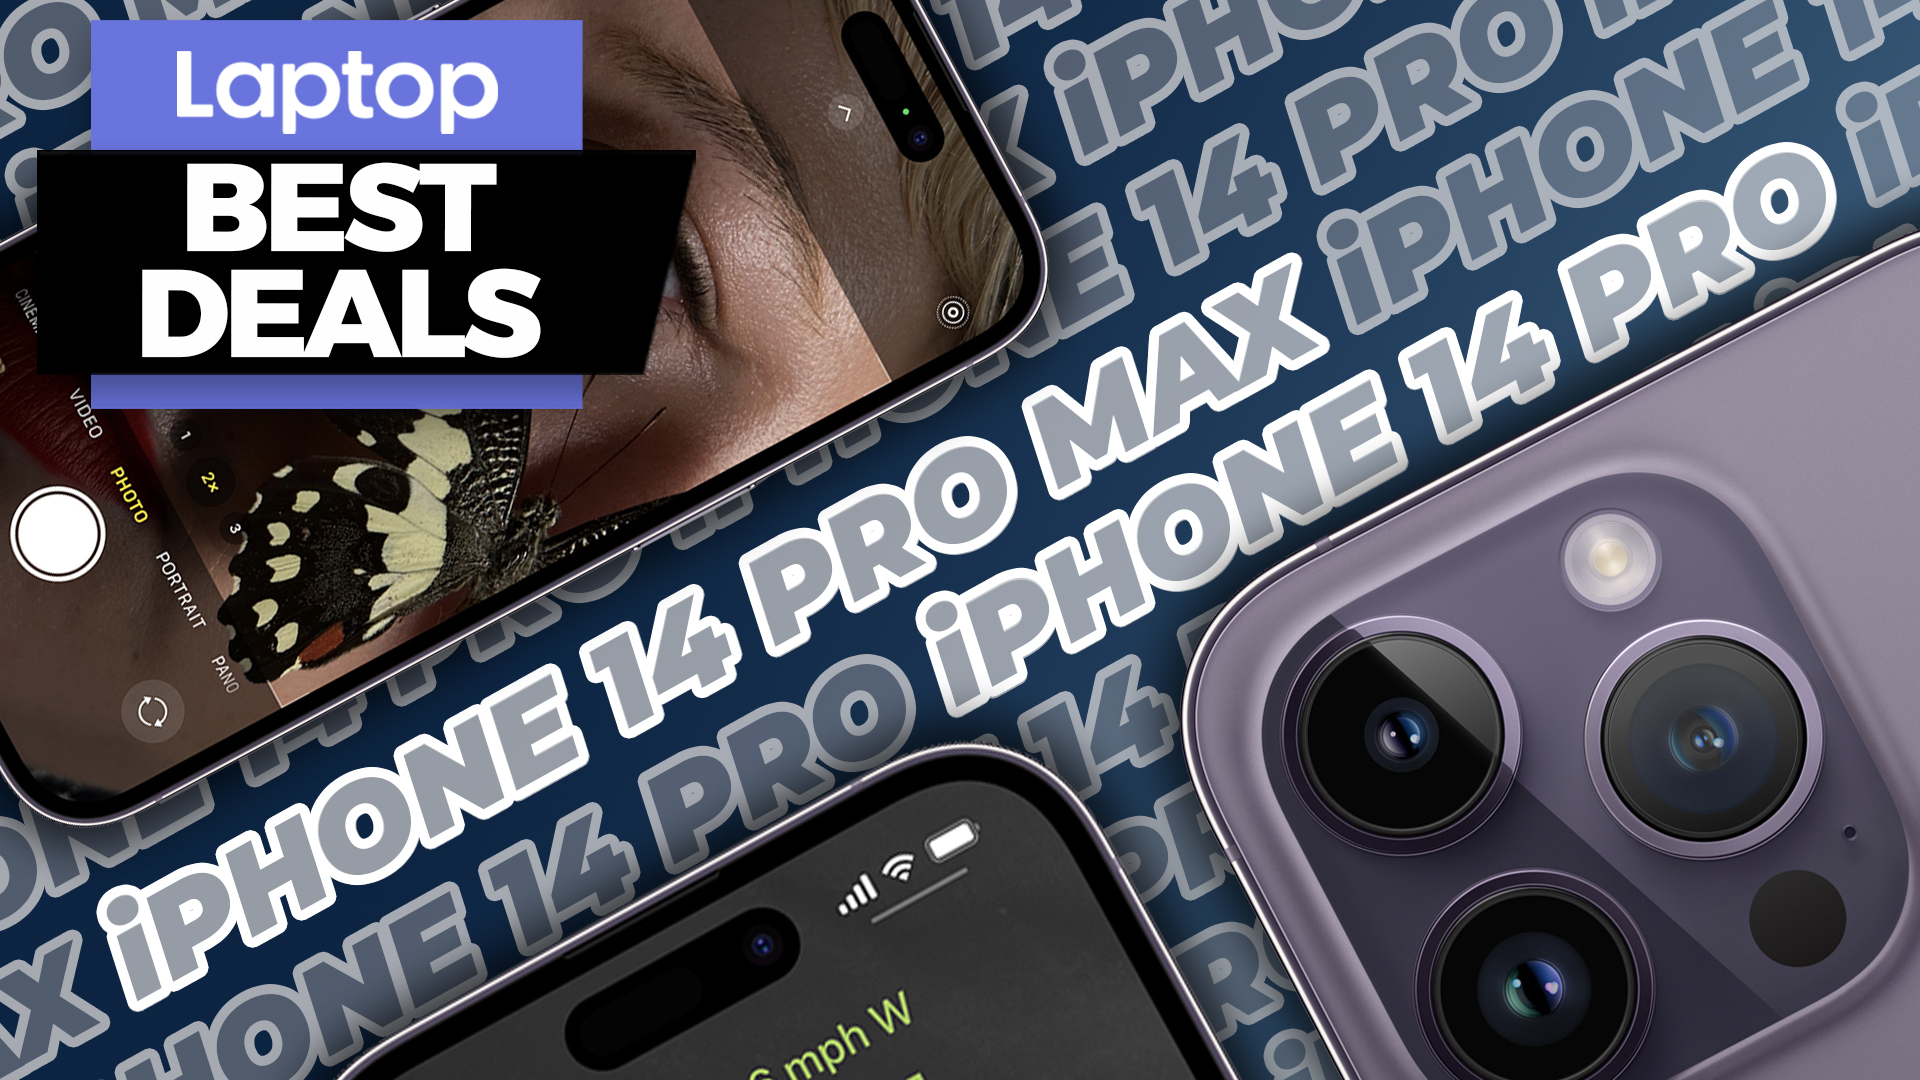 iphone 14 pro max phone - Prices and Deals - Nov 2023